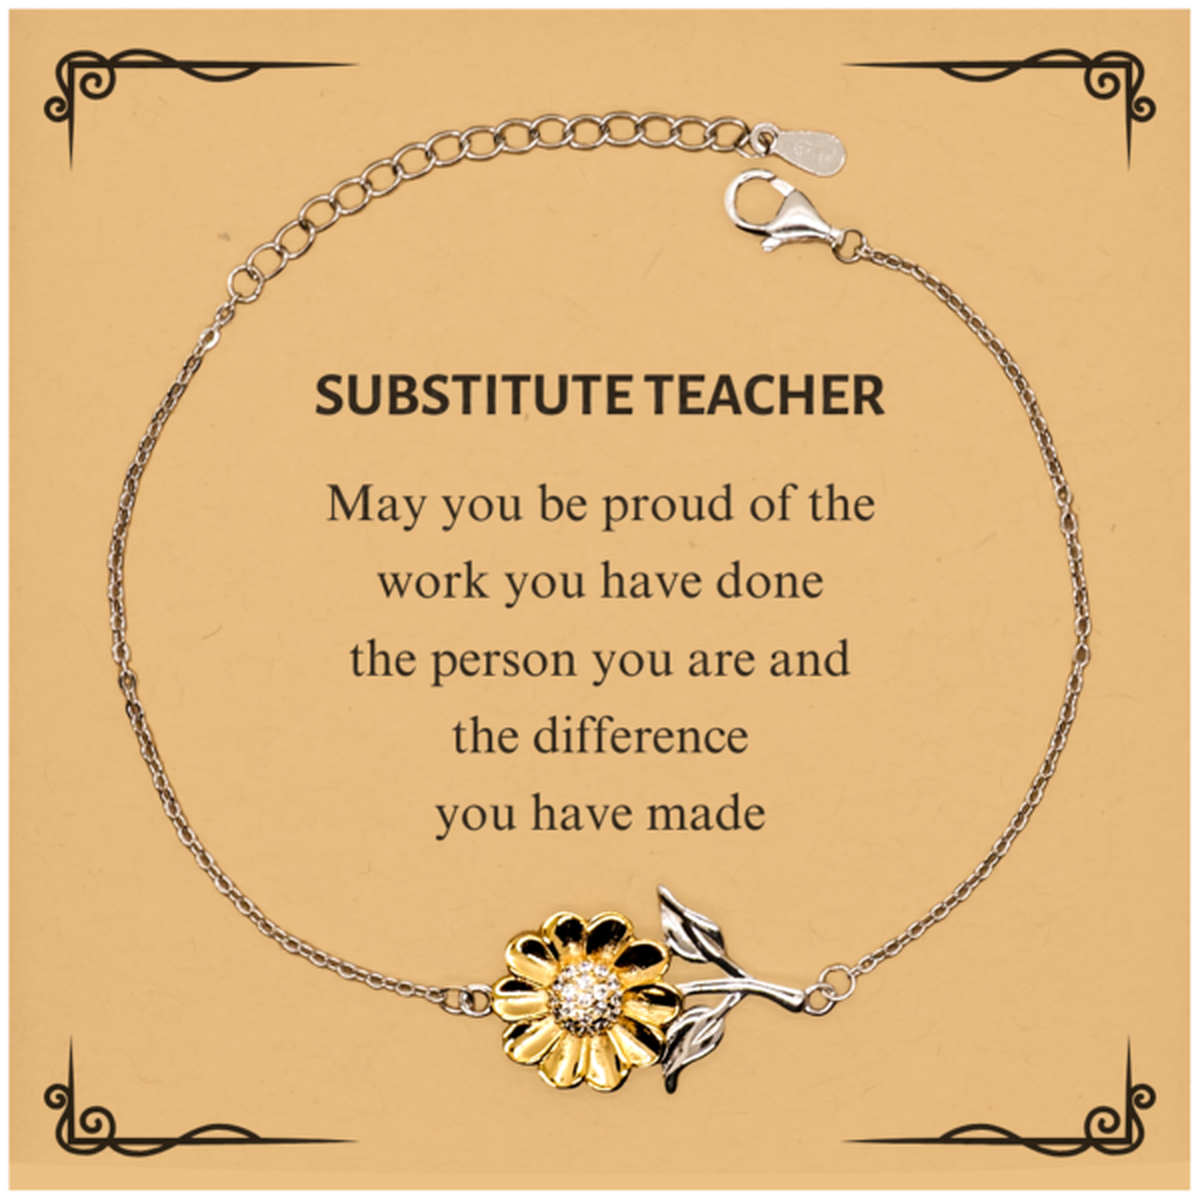 Substitute Teacher May you be proud of the work you have done, Retirement Substitute Teacher Sunflower Bracelet for Colleague Appreciation Gifts Amazing for Substitute Teacher